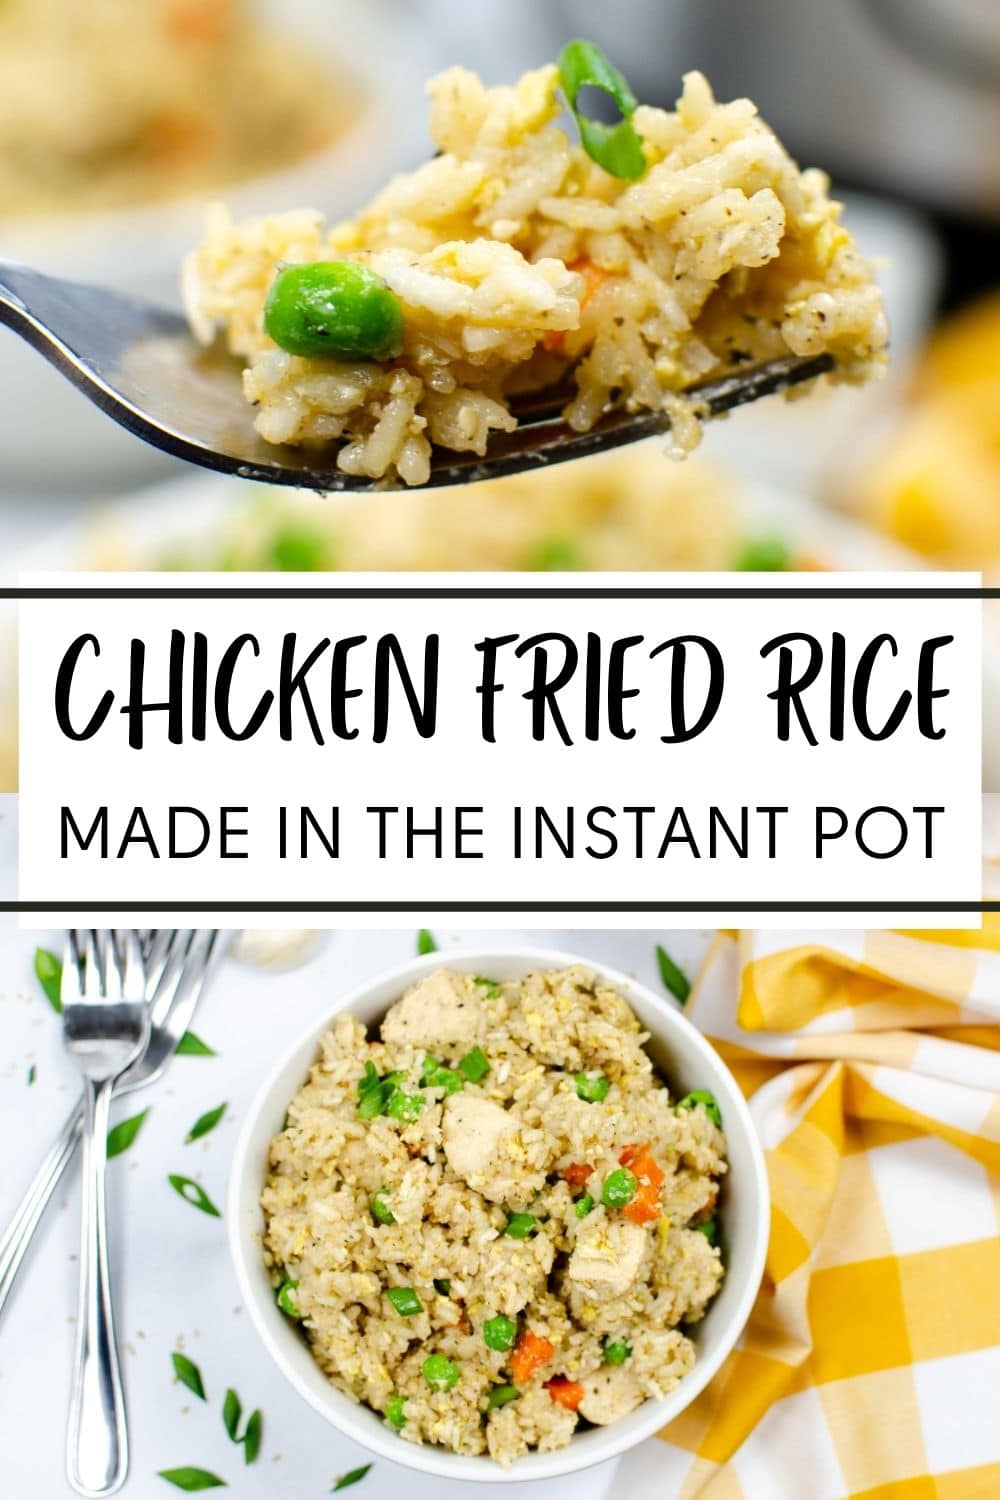 This instant pot chicken fried rice is a quick and easy all-in-one meal for lunch or dinner. Ready in no time, it tastes as good as takeout chicken fried rice! #instantpot #pressurecooker #chickenfriedrice #asianfood via @wondermomwannab